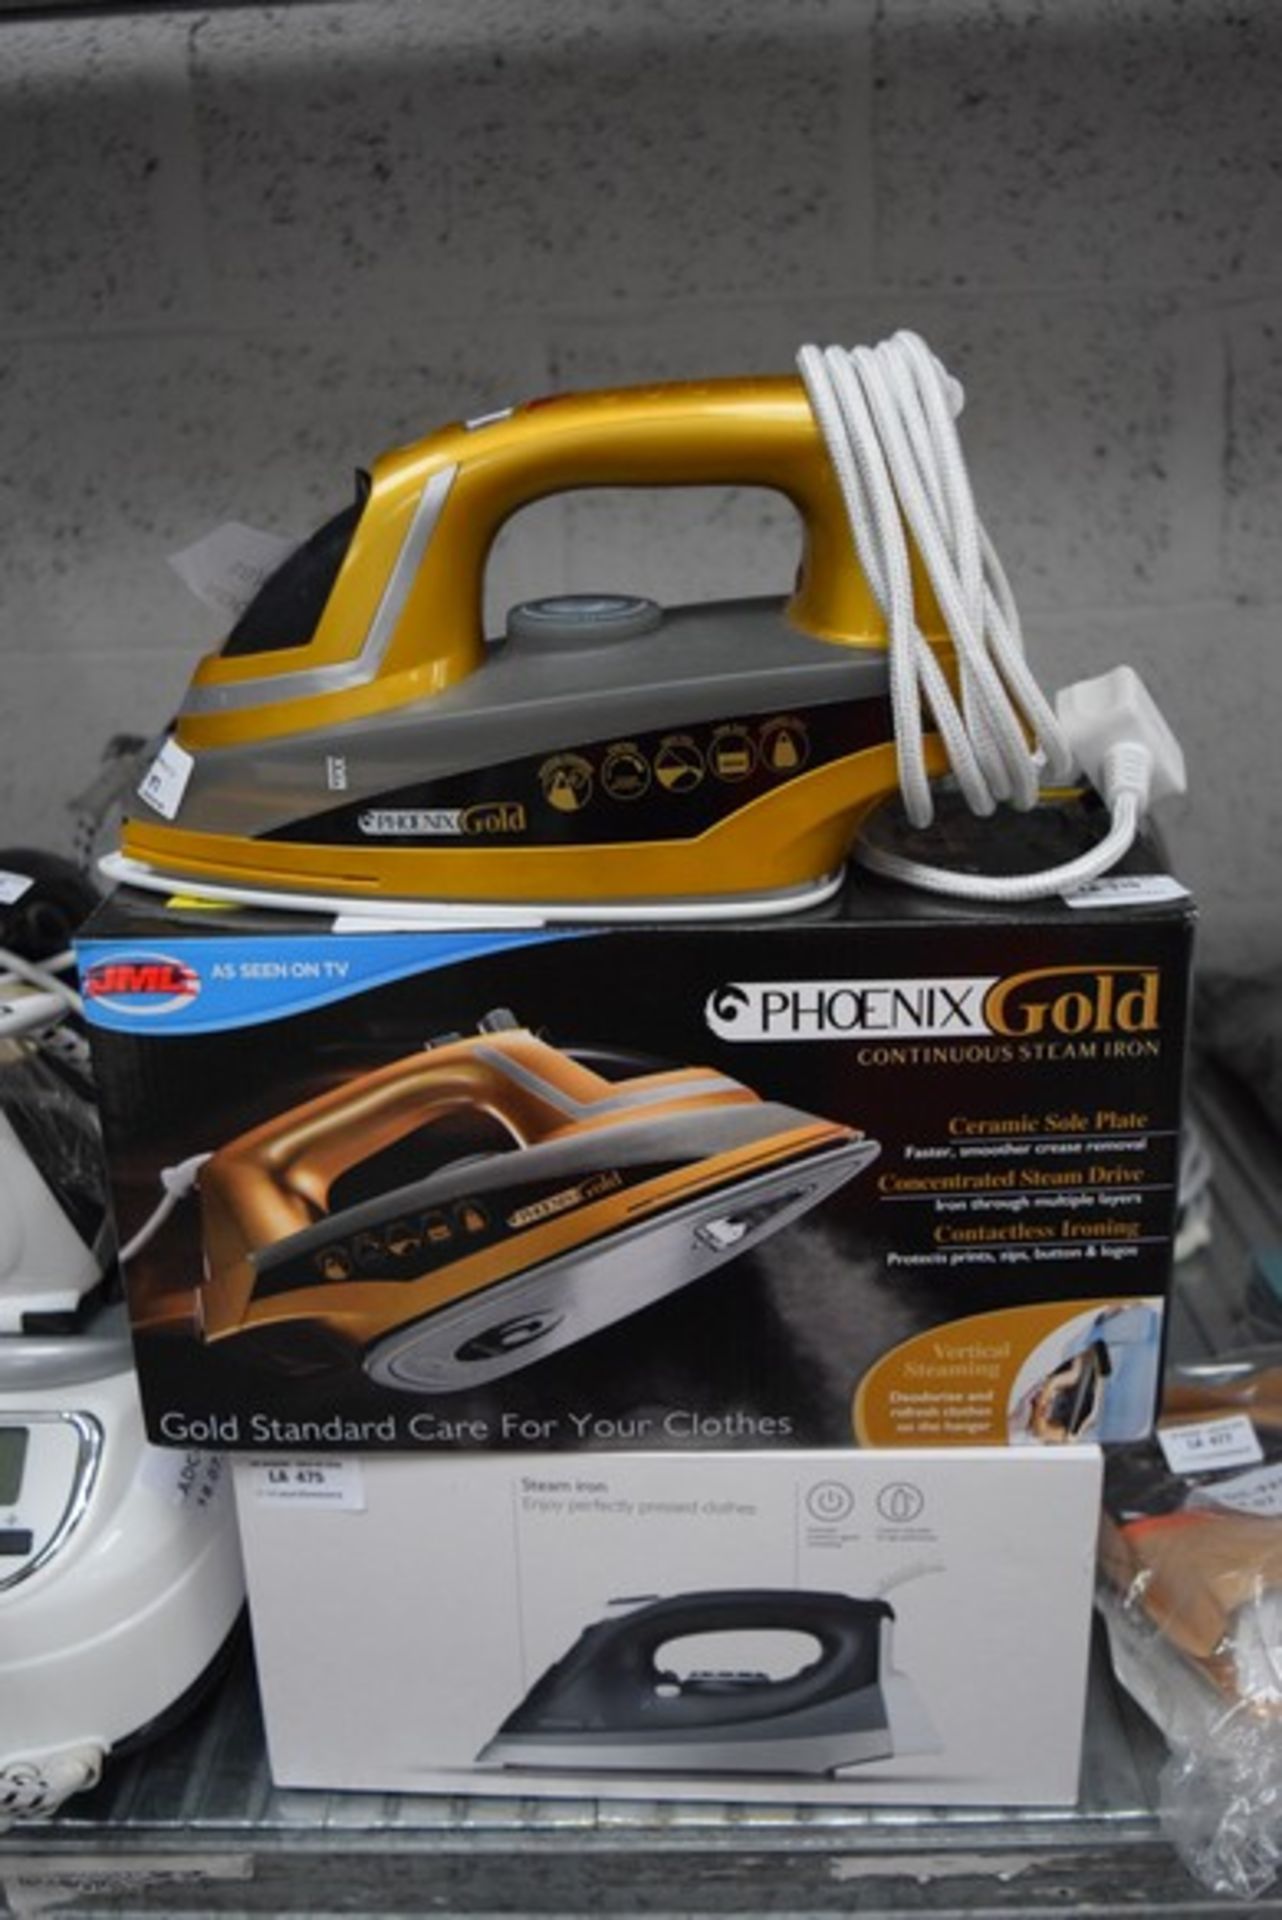 1 x BOXED PHOENIX GOLD CERAMIC SOLE PLATE STEAM IRON RRP £40 10/07/17 *PLEASE NOTE THAT THE BID